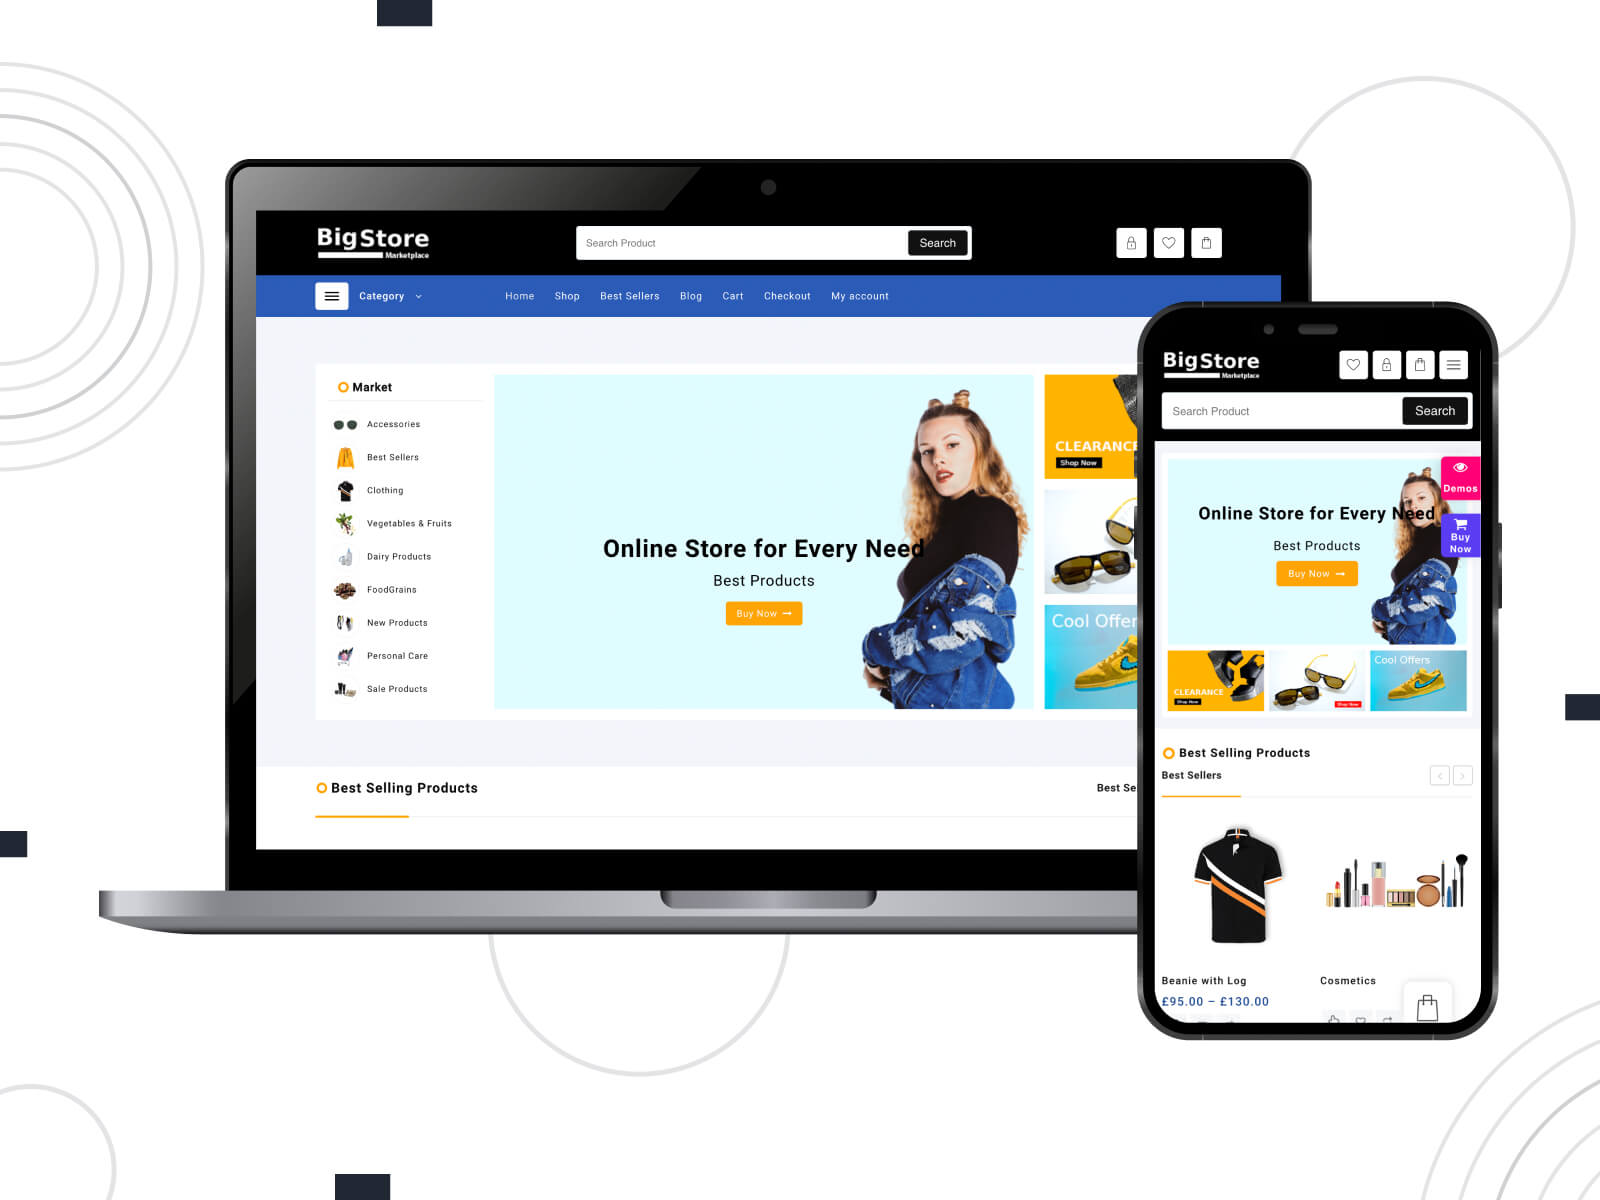 Picture of Big-store - light, cool, offering a wide array of shortcode options, this theme is celebrated for its functionality among multipurpose WordPress themes in steel blue, light cyan, and goldenrod hues.